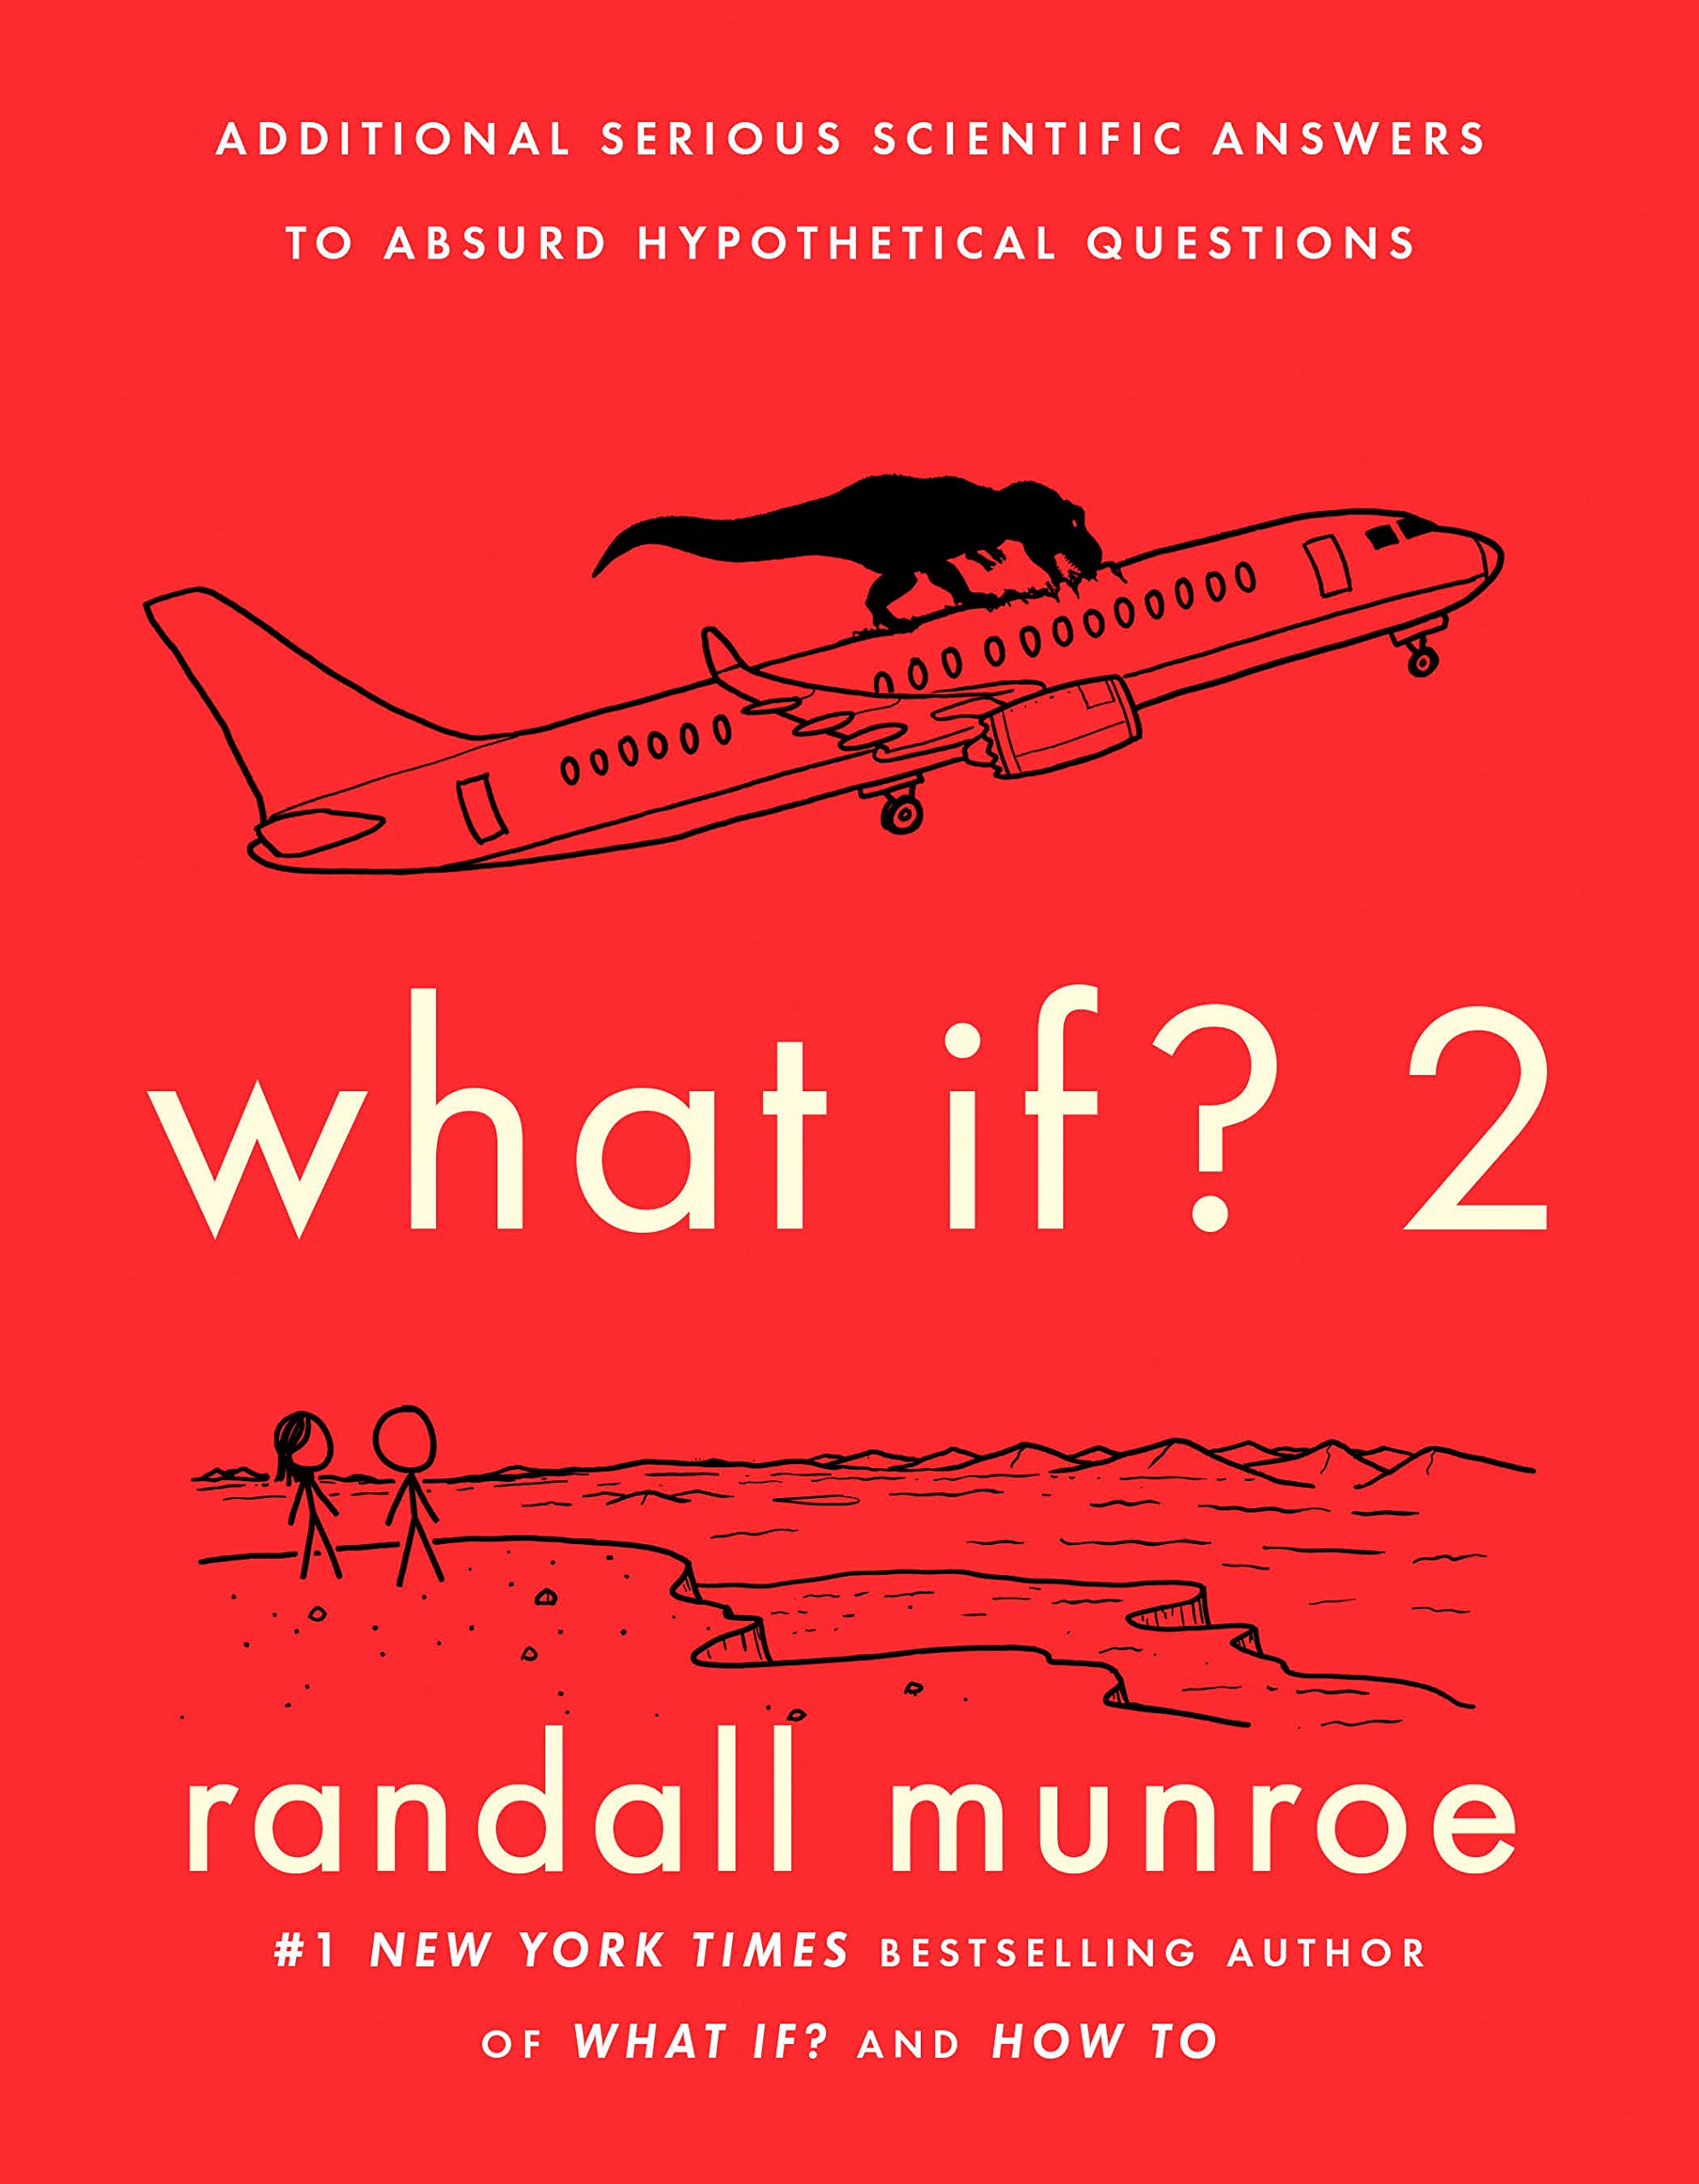 What If? 2: Additional Serious Scientific Answers to Absurd Hypothetical Questions (What If?, #2)